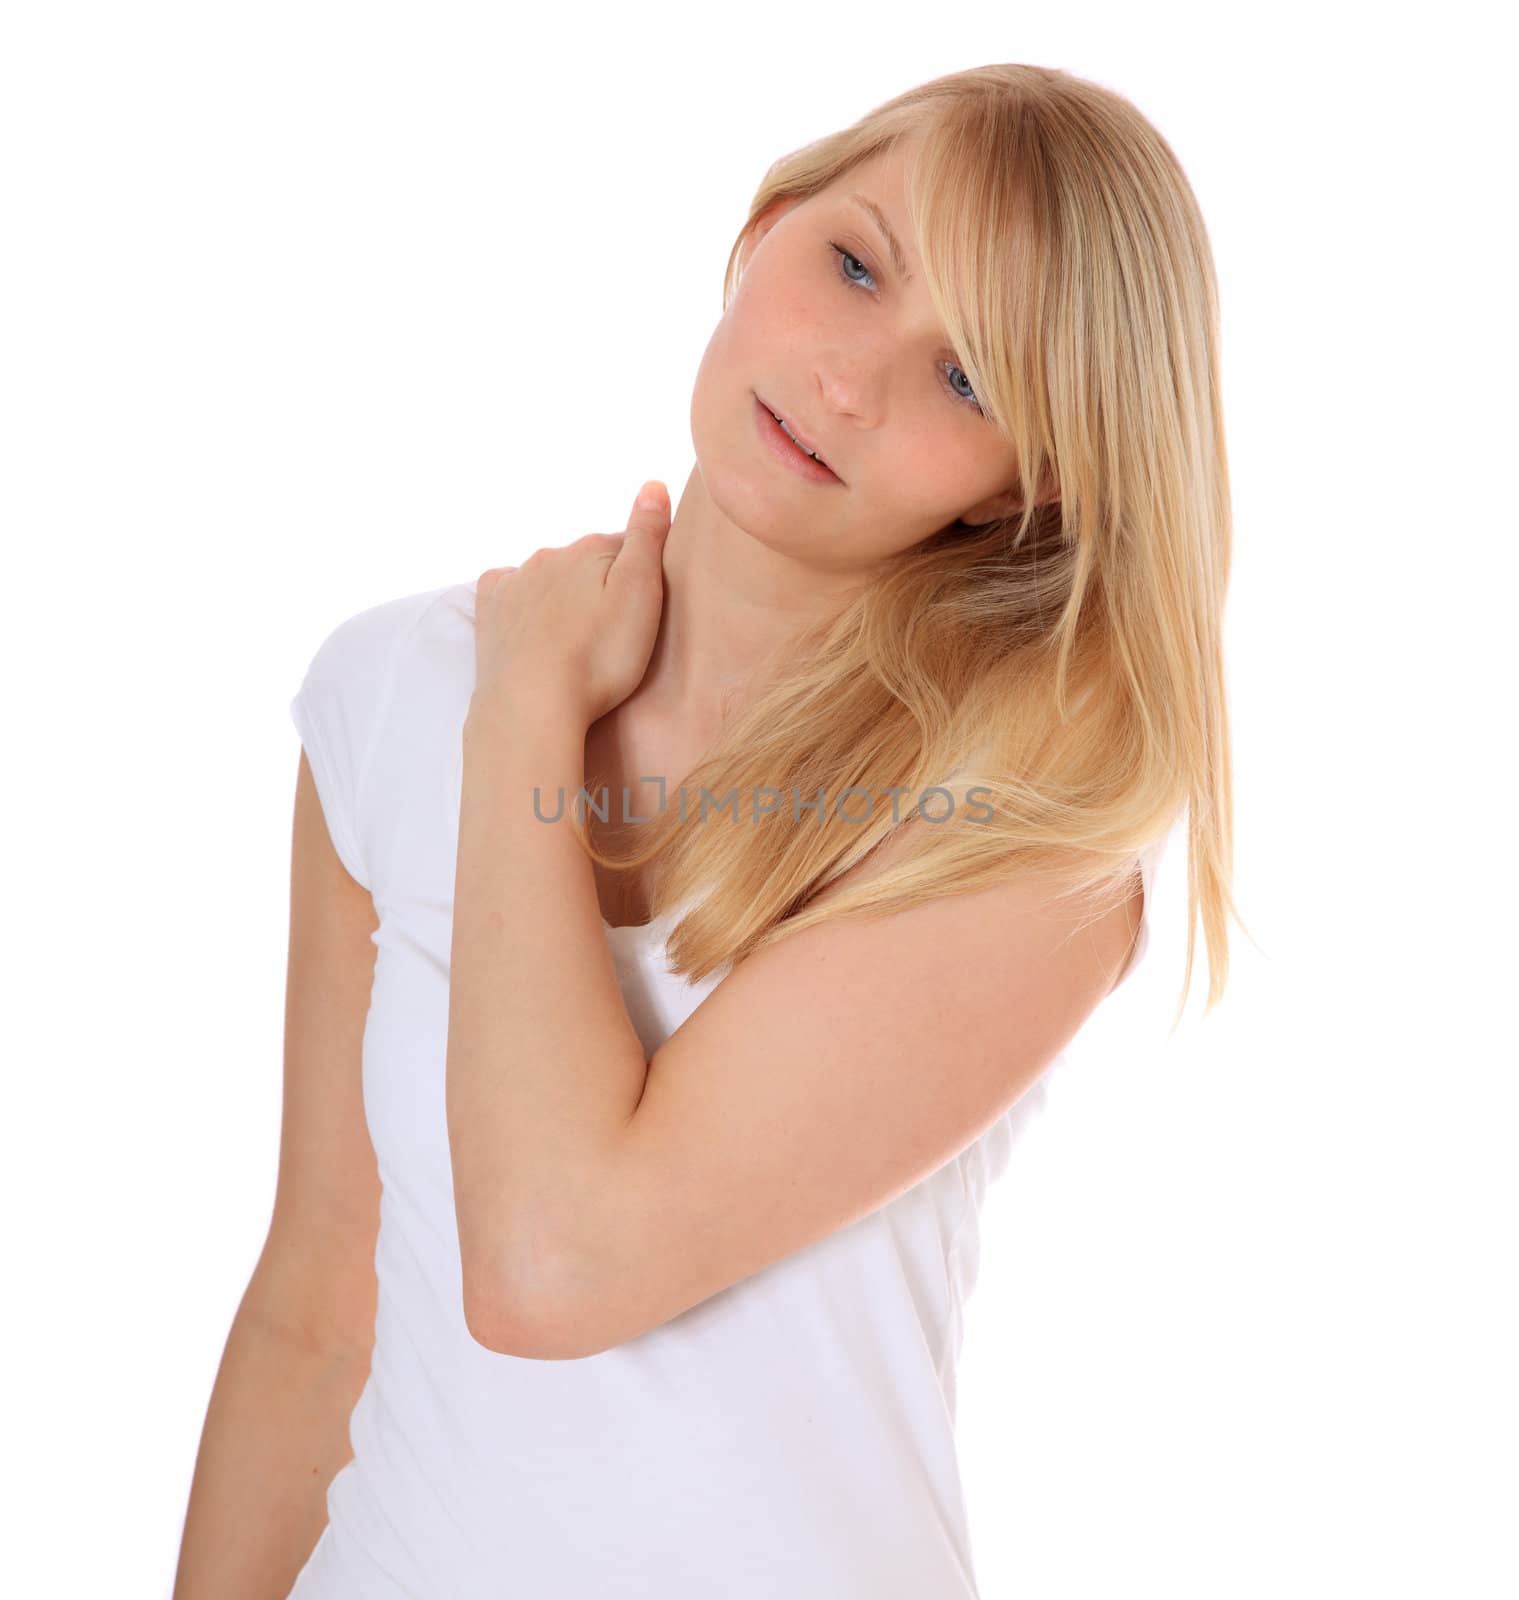 Attractive young woman suffering from neck pain. All on white background.